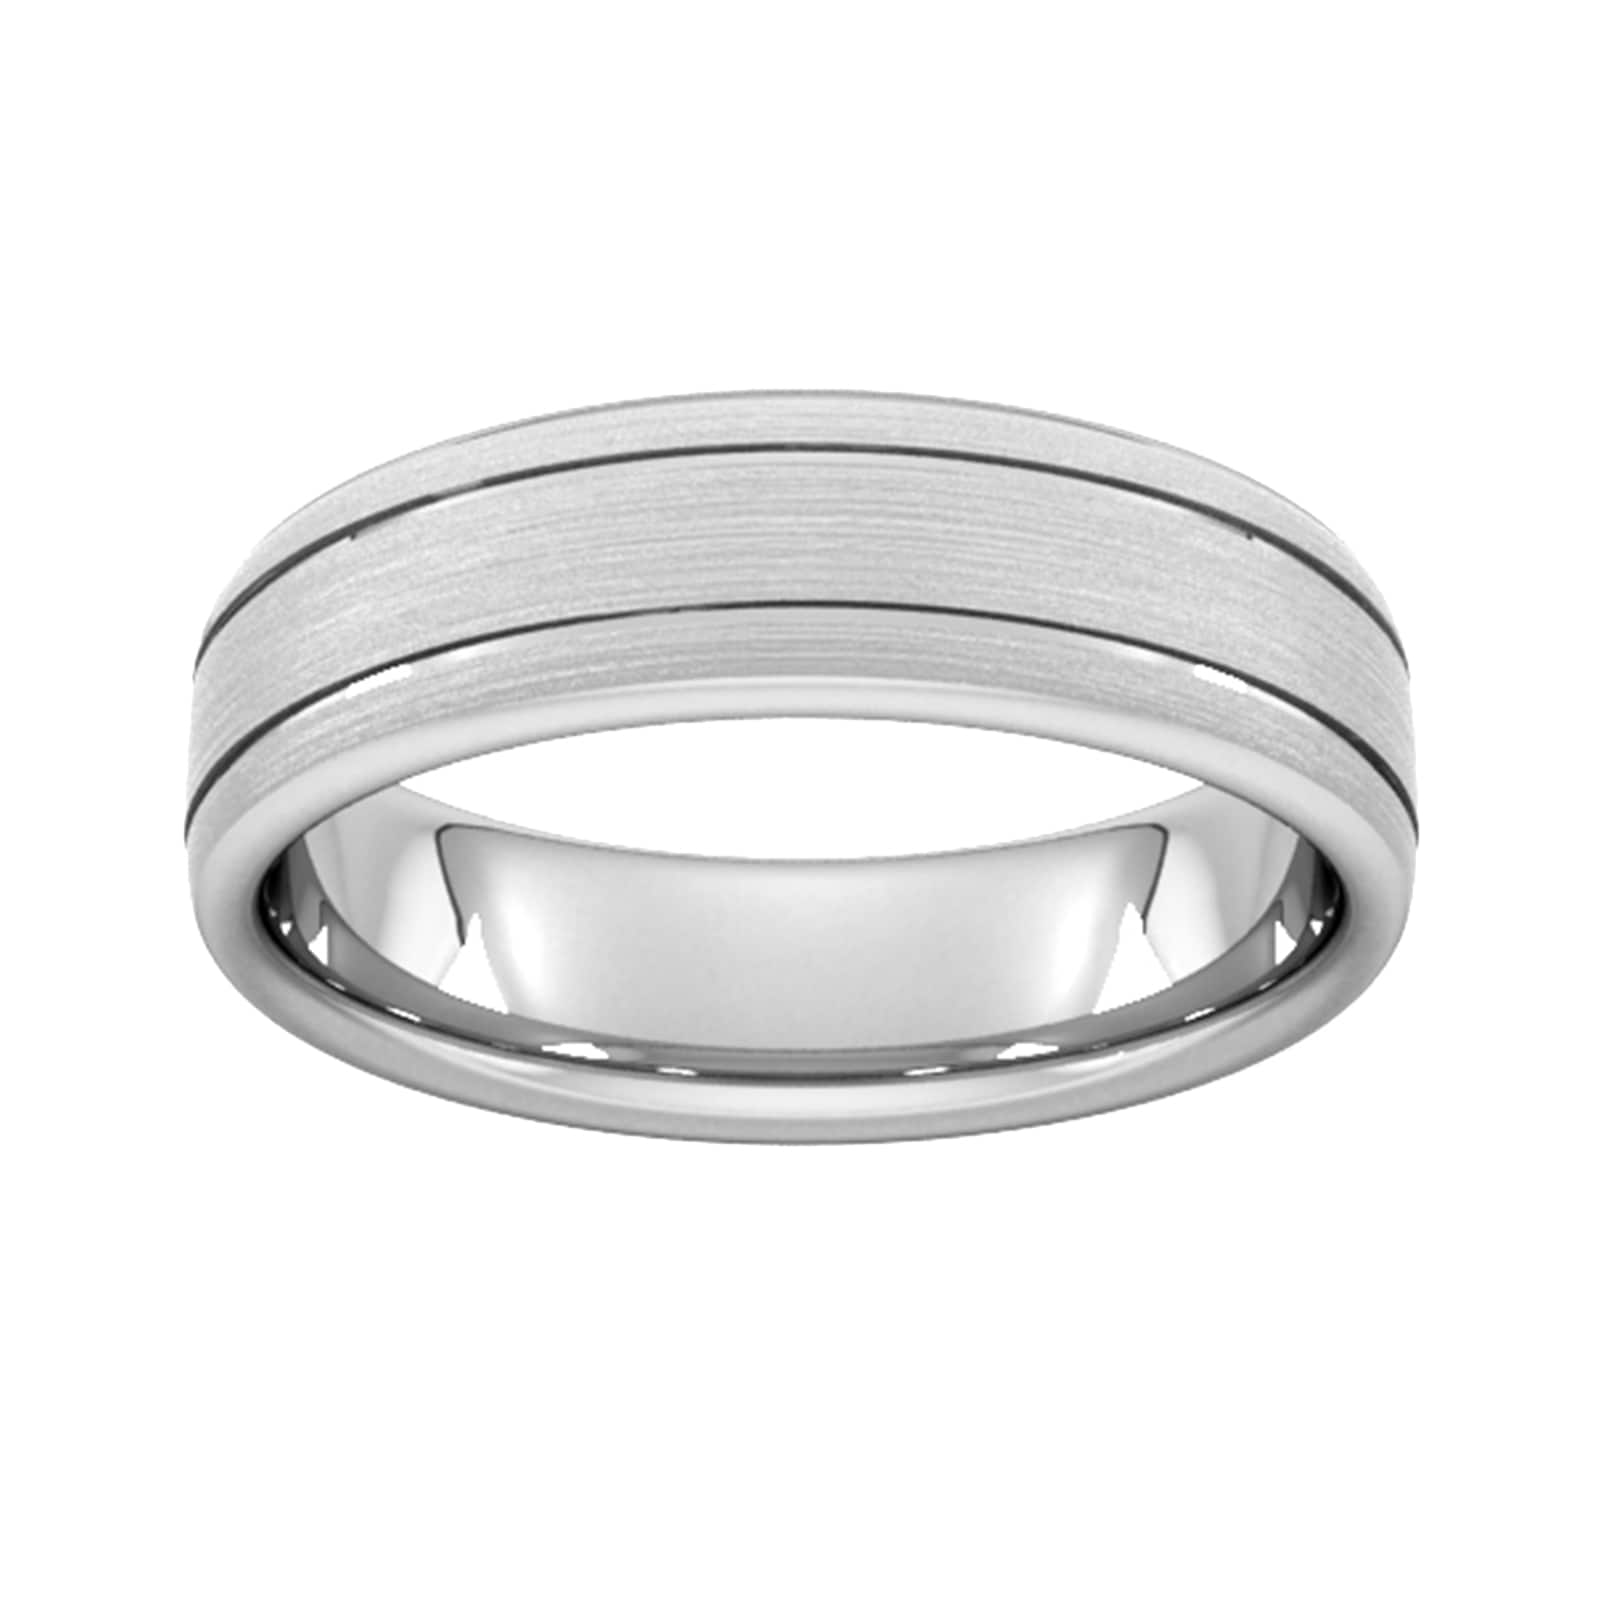 6mm Slight Court Standard Matt Finish With Double Grooves Wedding Ring In 18 Carat White Gold - Ring Size U